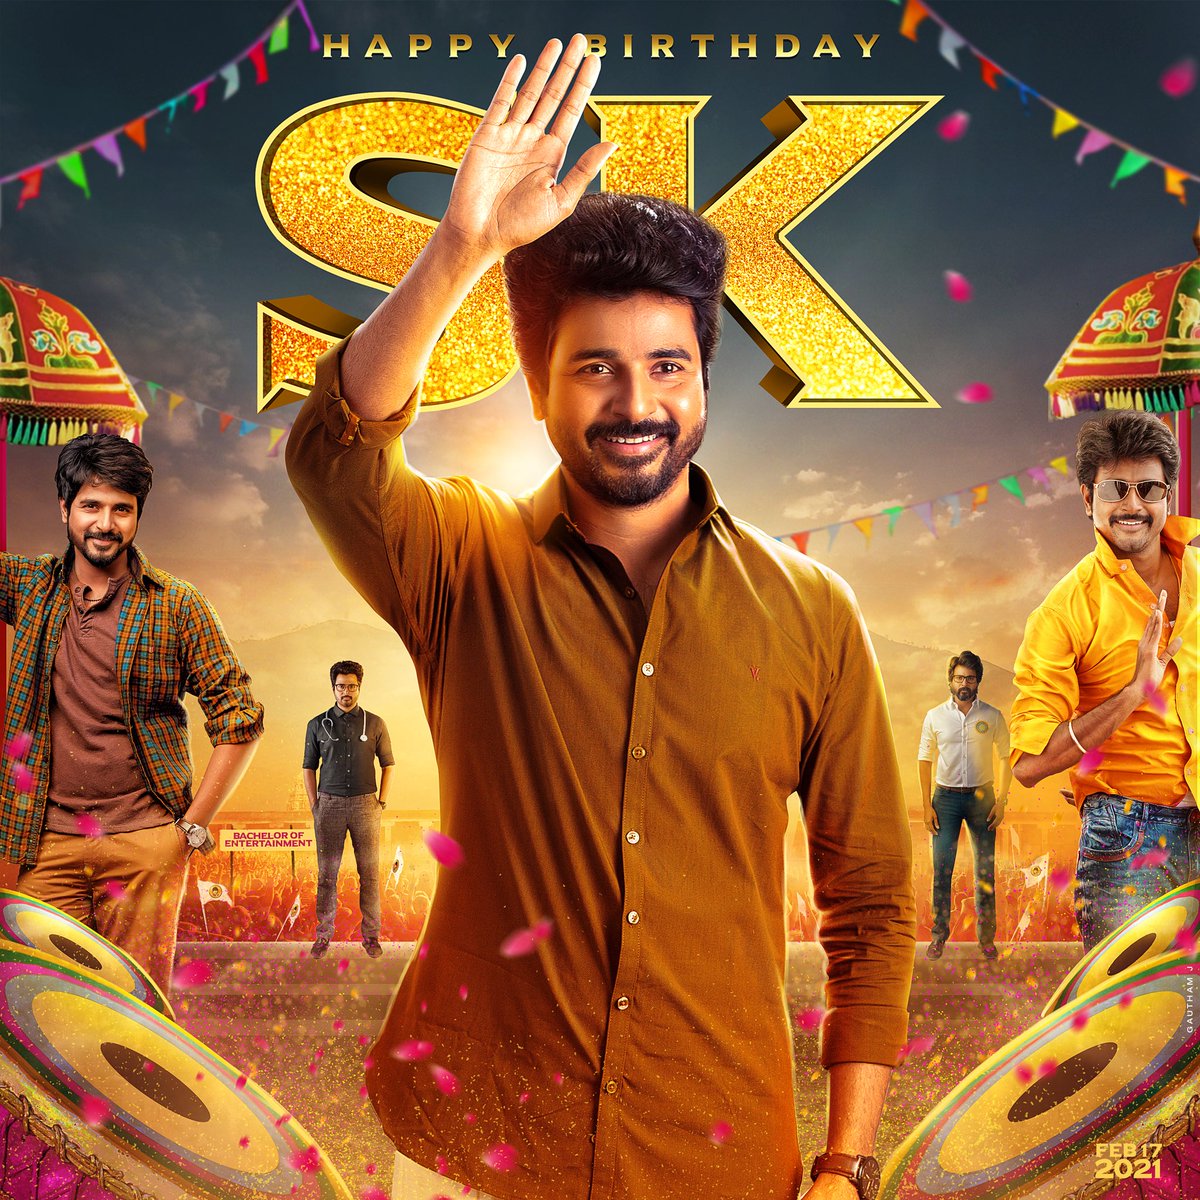 The wait is over.... Here's the common DP for @Siva_Kartikeyan's birthday celebration. Wishing a very very happy birthday to you brother ❤️❤️❤️❤️❤️❤️❤️❤️❤️❤️... Waiting for the blast 🎉🔥🔥🎉🔥🎉🔥🎉 #HBDPrinceSivaKarthikeyan @AllIndiaSKFC @BlackSheepTamil @bs_value